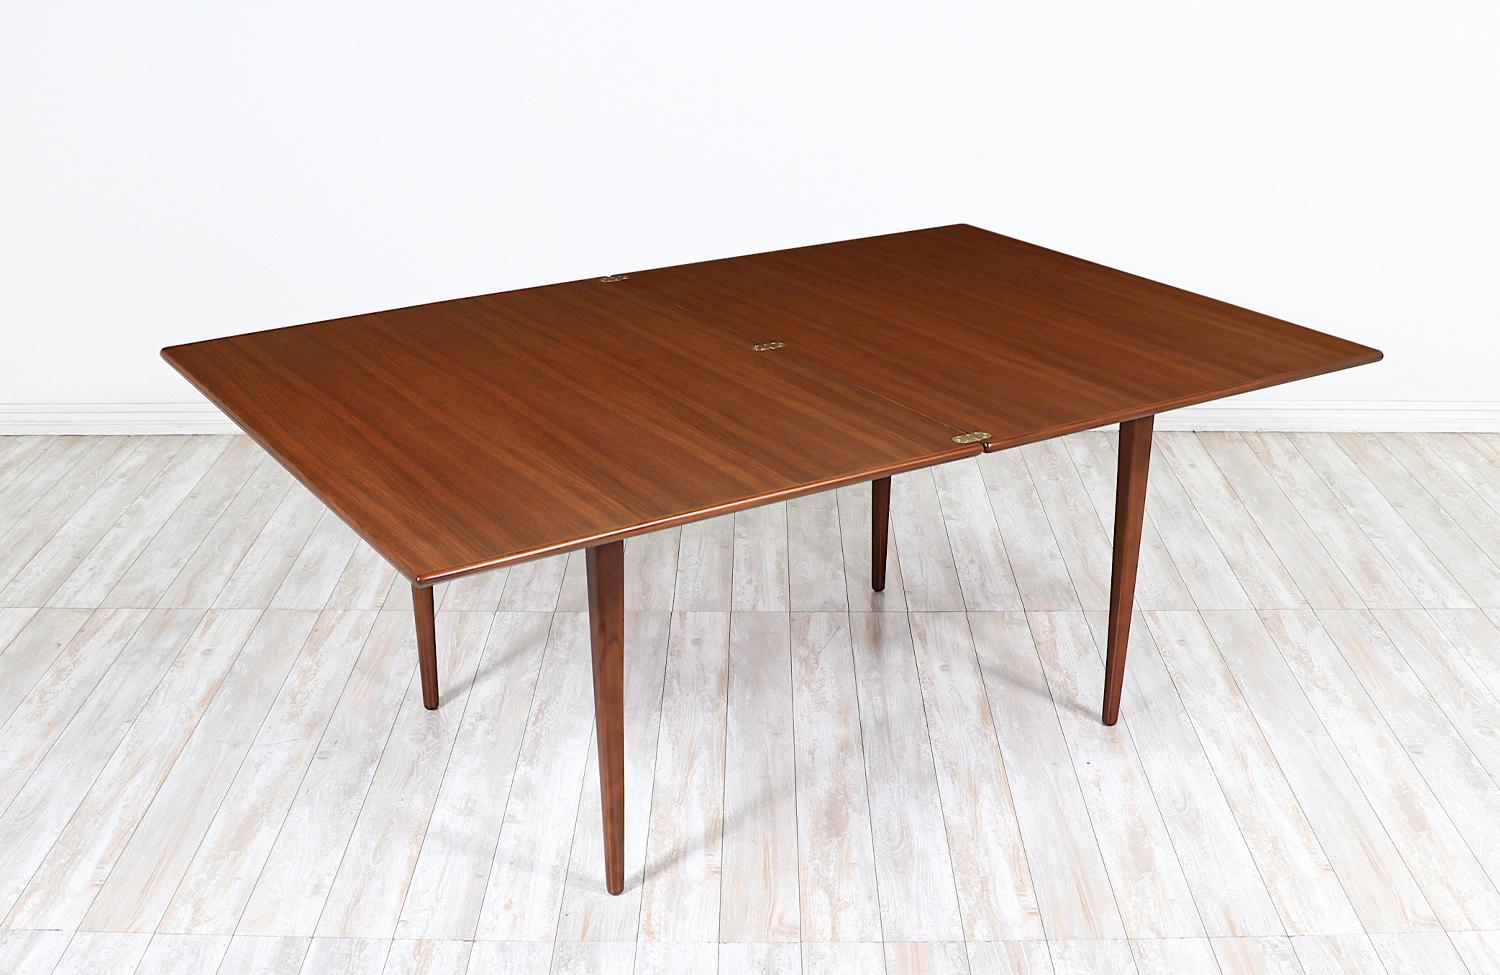 Karl-Erik Ekselius Model-1401 expanding walnut dining table for Dux.

Dimensions
29.25in H x 36in - 72in W x 47.50in D  
Extension Leaf 36in
 
______________________________________________________________

Transforming a piece of Mid-Century Modern